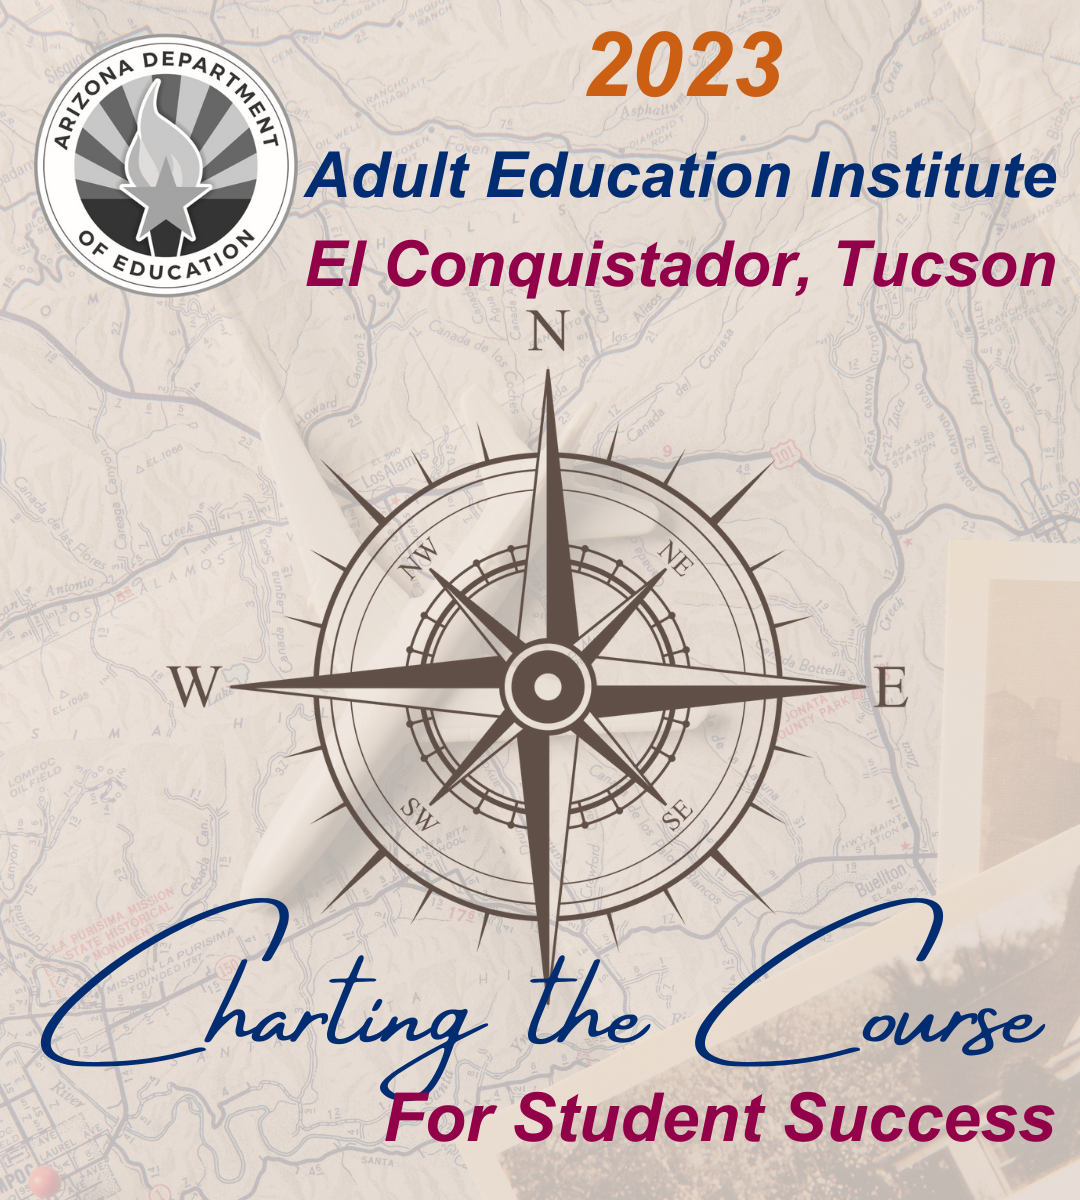 2023 Arizona Adult Education Institute at the El Conquistador, Tucson. This year's theme is 'Charting the Course for Student Success.'